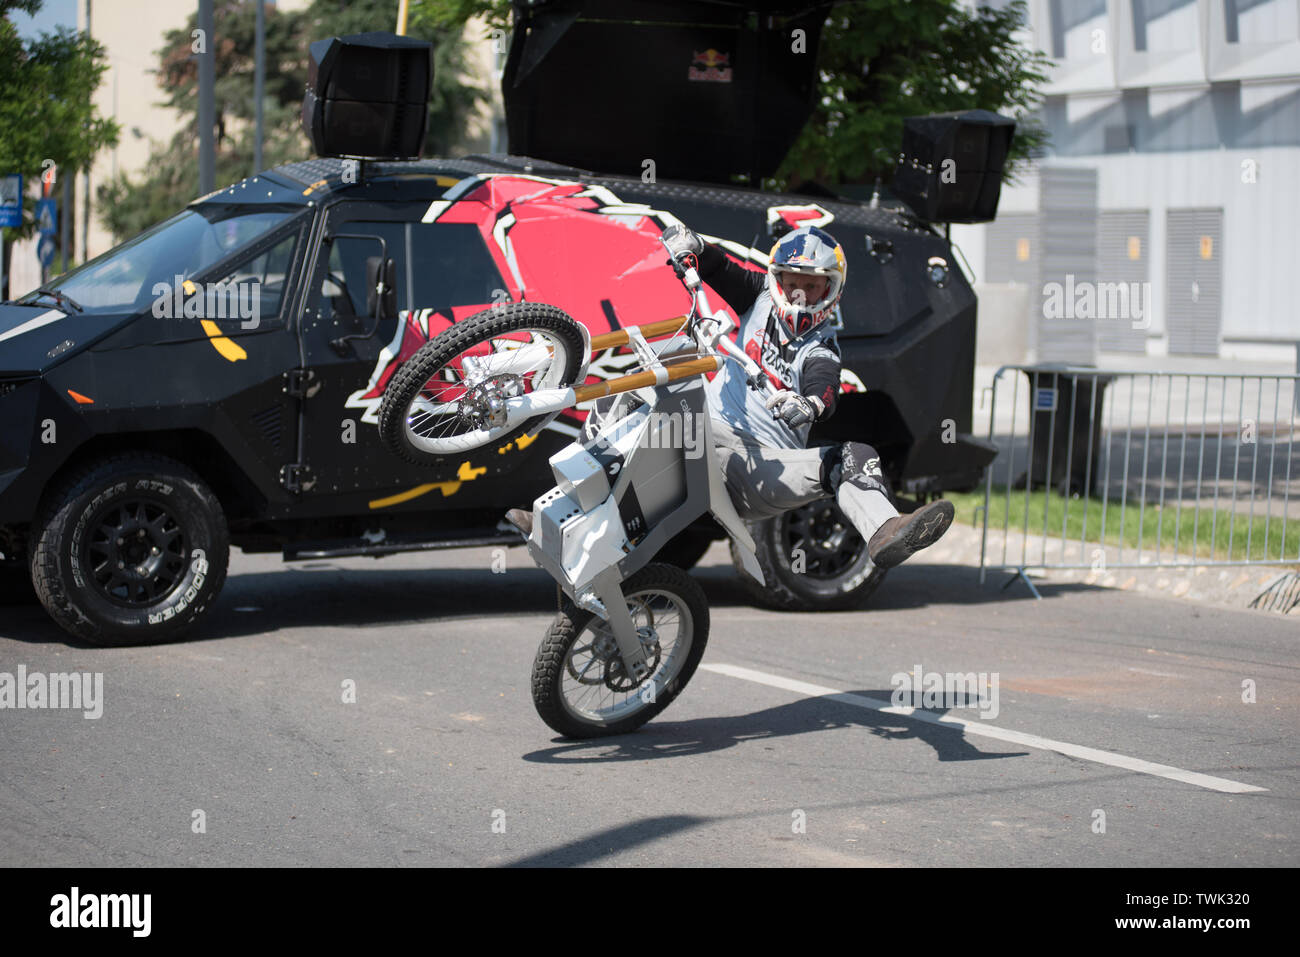 CLUJ, ROMANIA - JUNE 16, 2019: Legendary motorcyclist Chris Pfeiffer stunt riding doing a demonstration with a BMW electric motion bike at Sports Fest Stock Photo